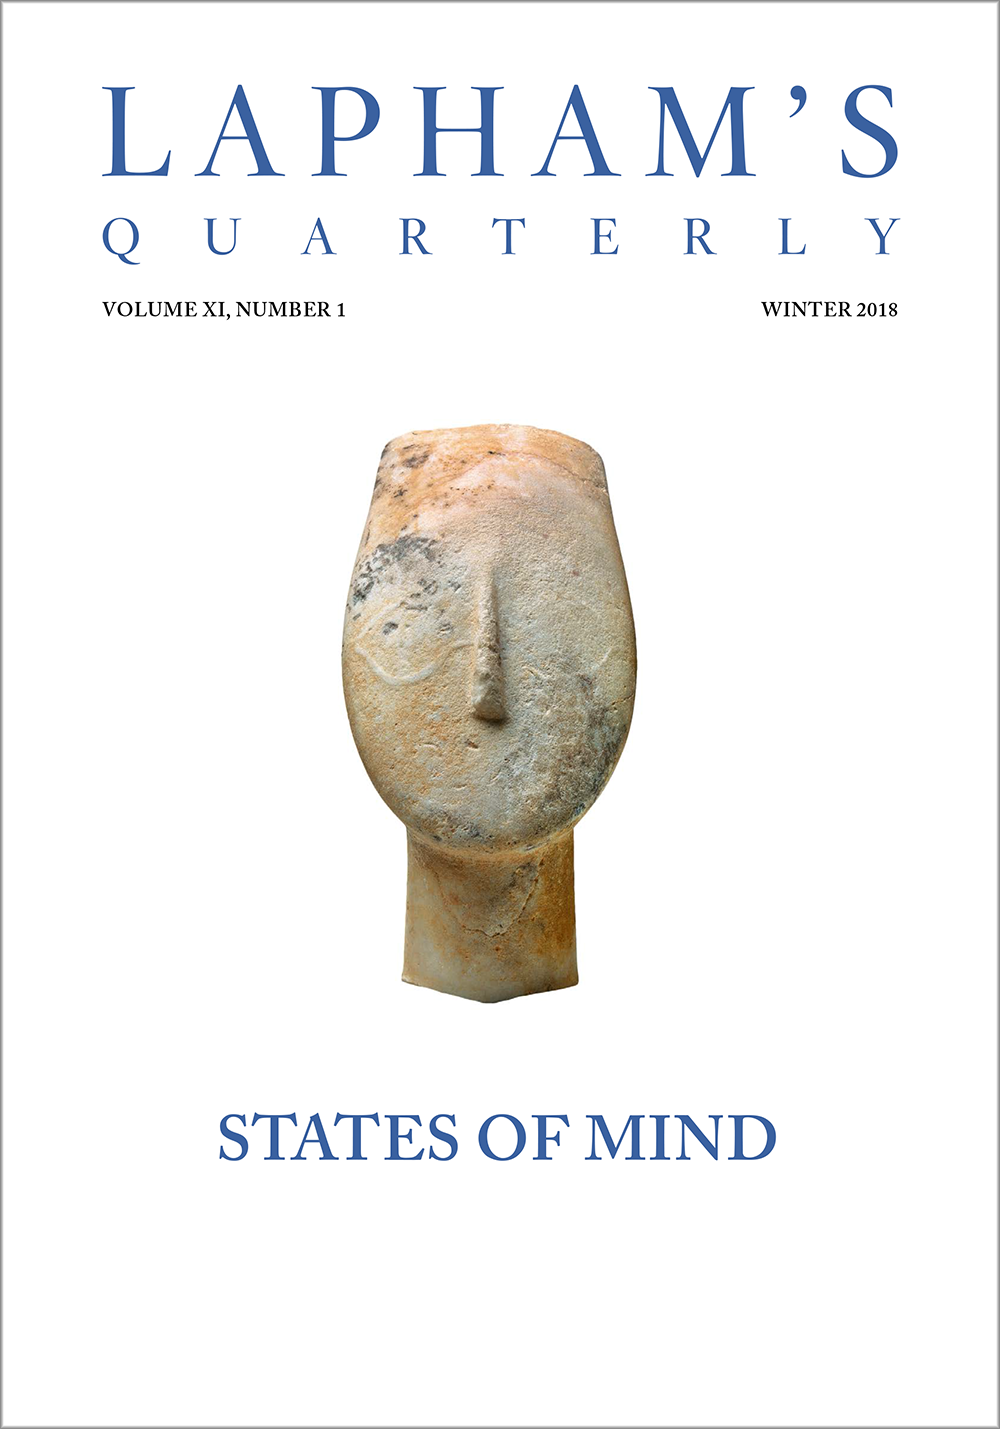 States of Mind, the tenth-anniversary issue of Lapham’s Quarterly.